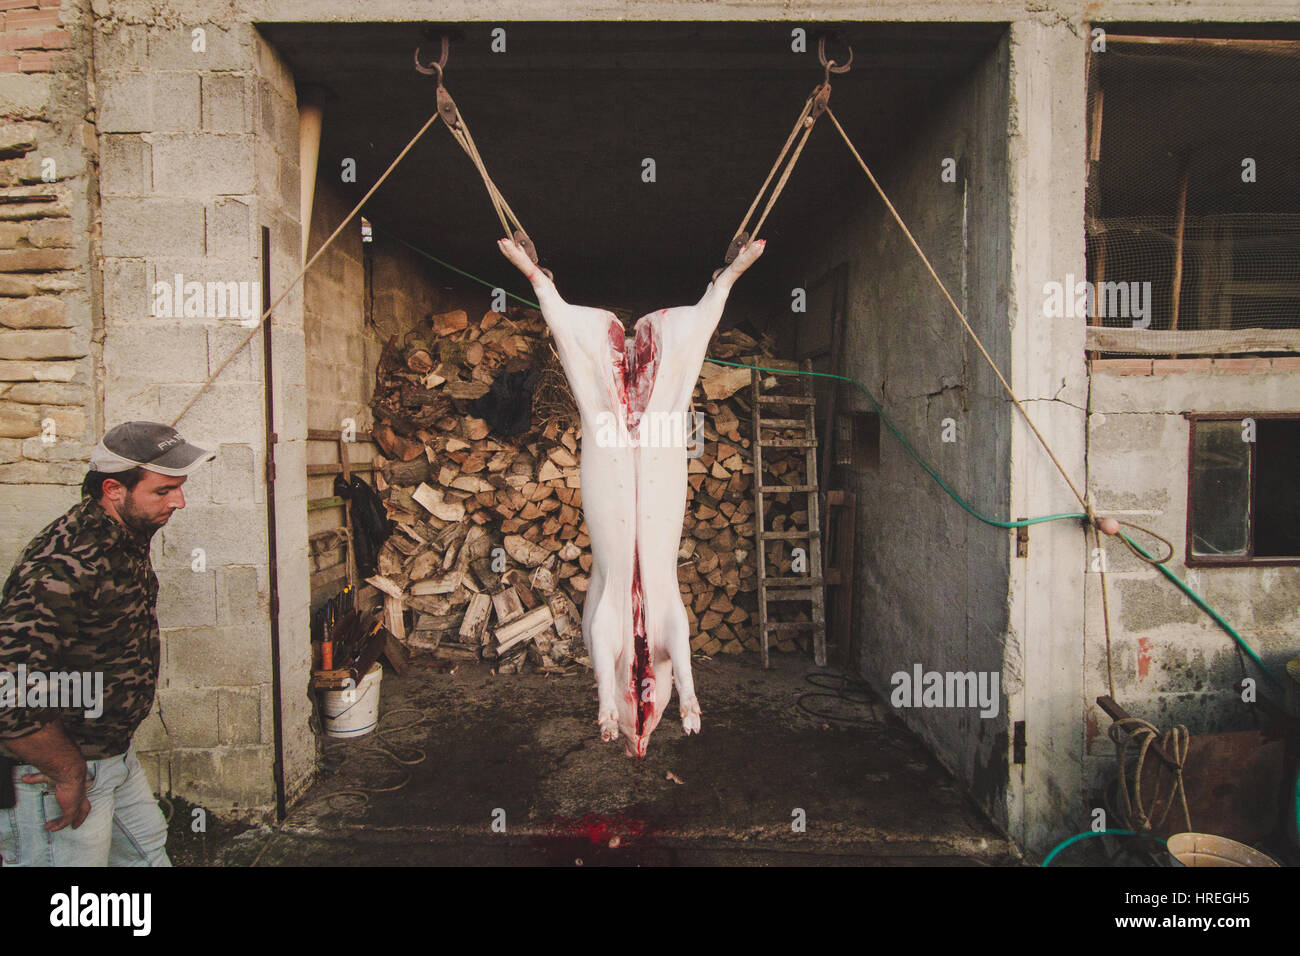 Dead pig cut open in a slaughterhouse in Alba, which is located in the province of Piedmont, Italy. Stock Photo